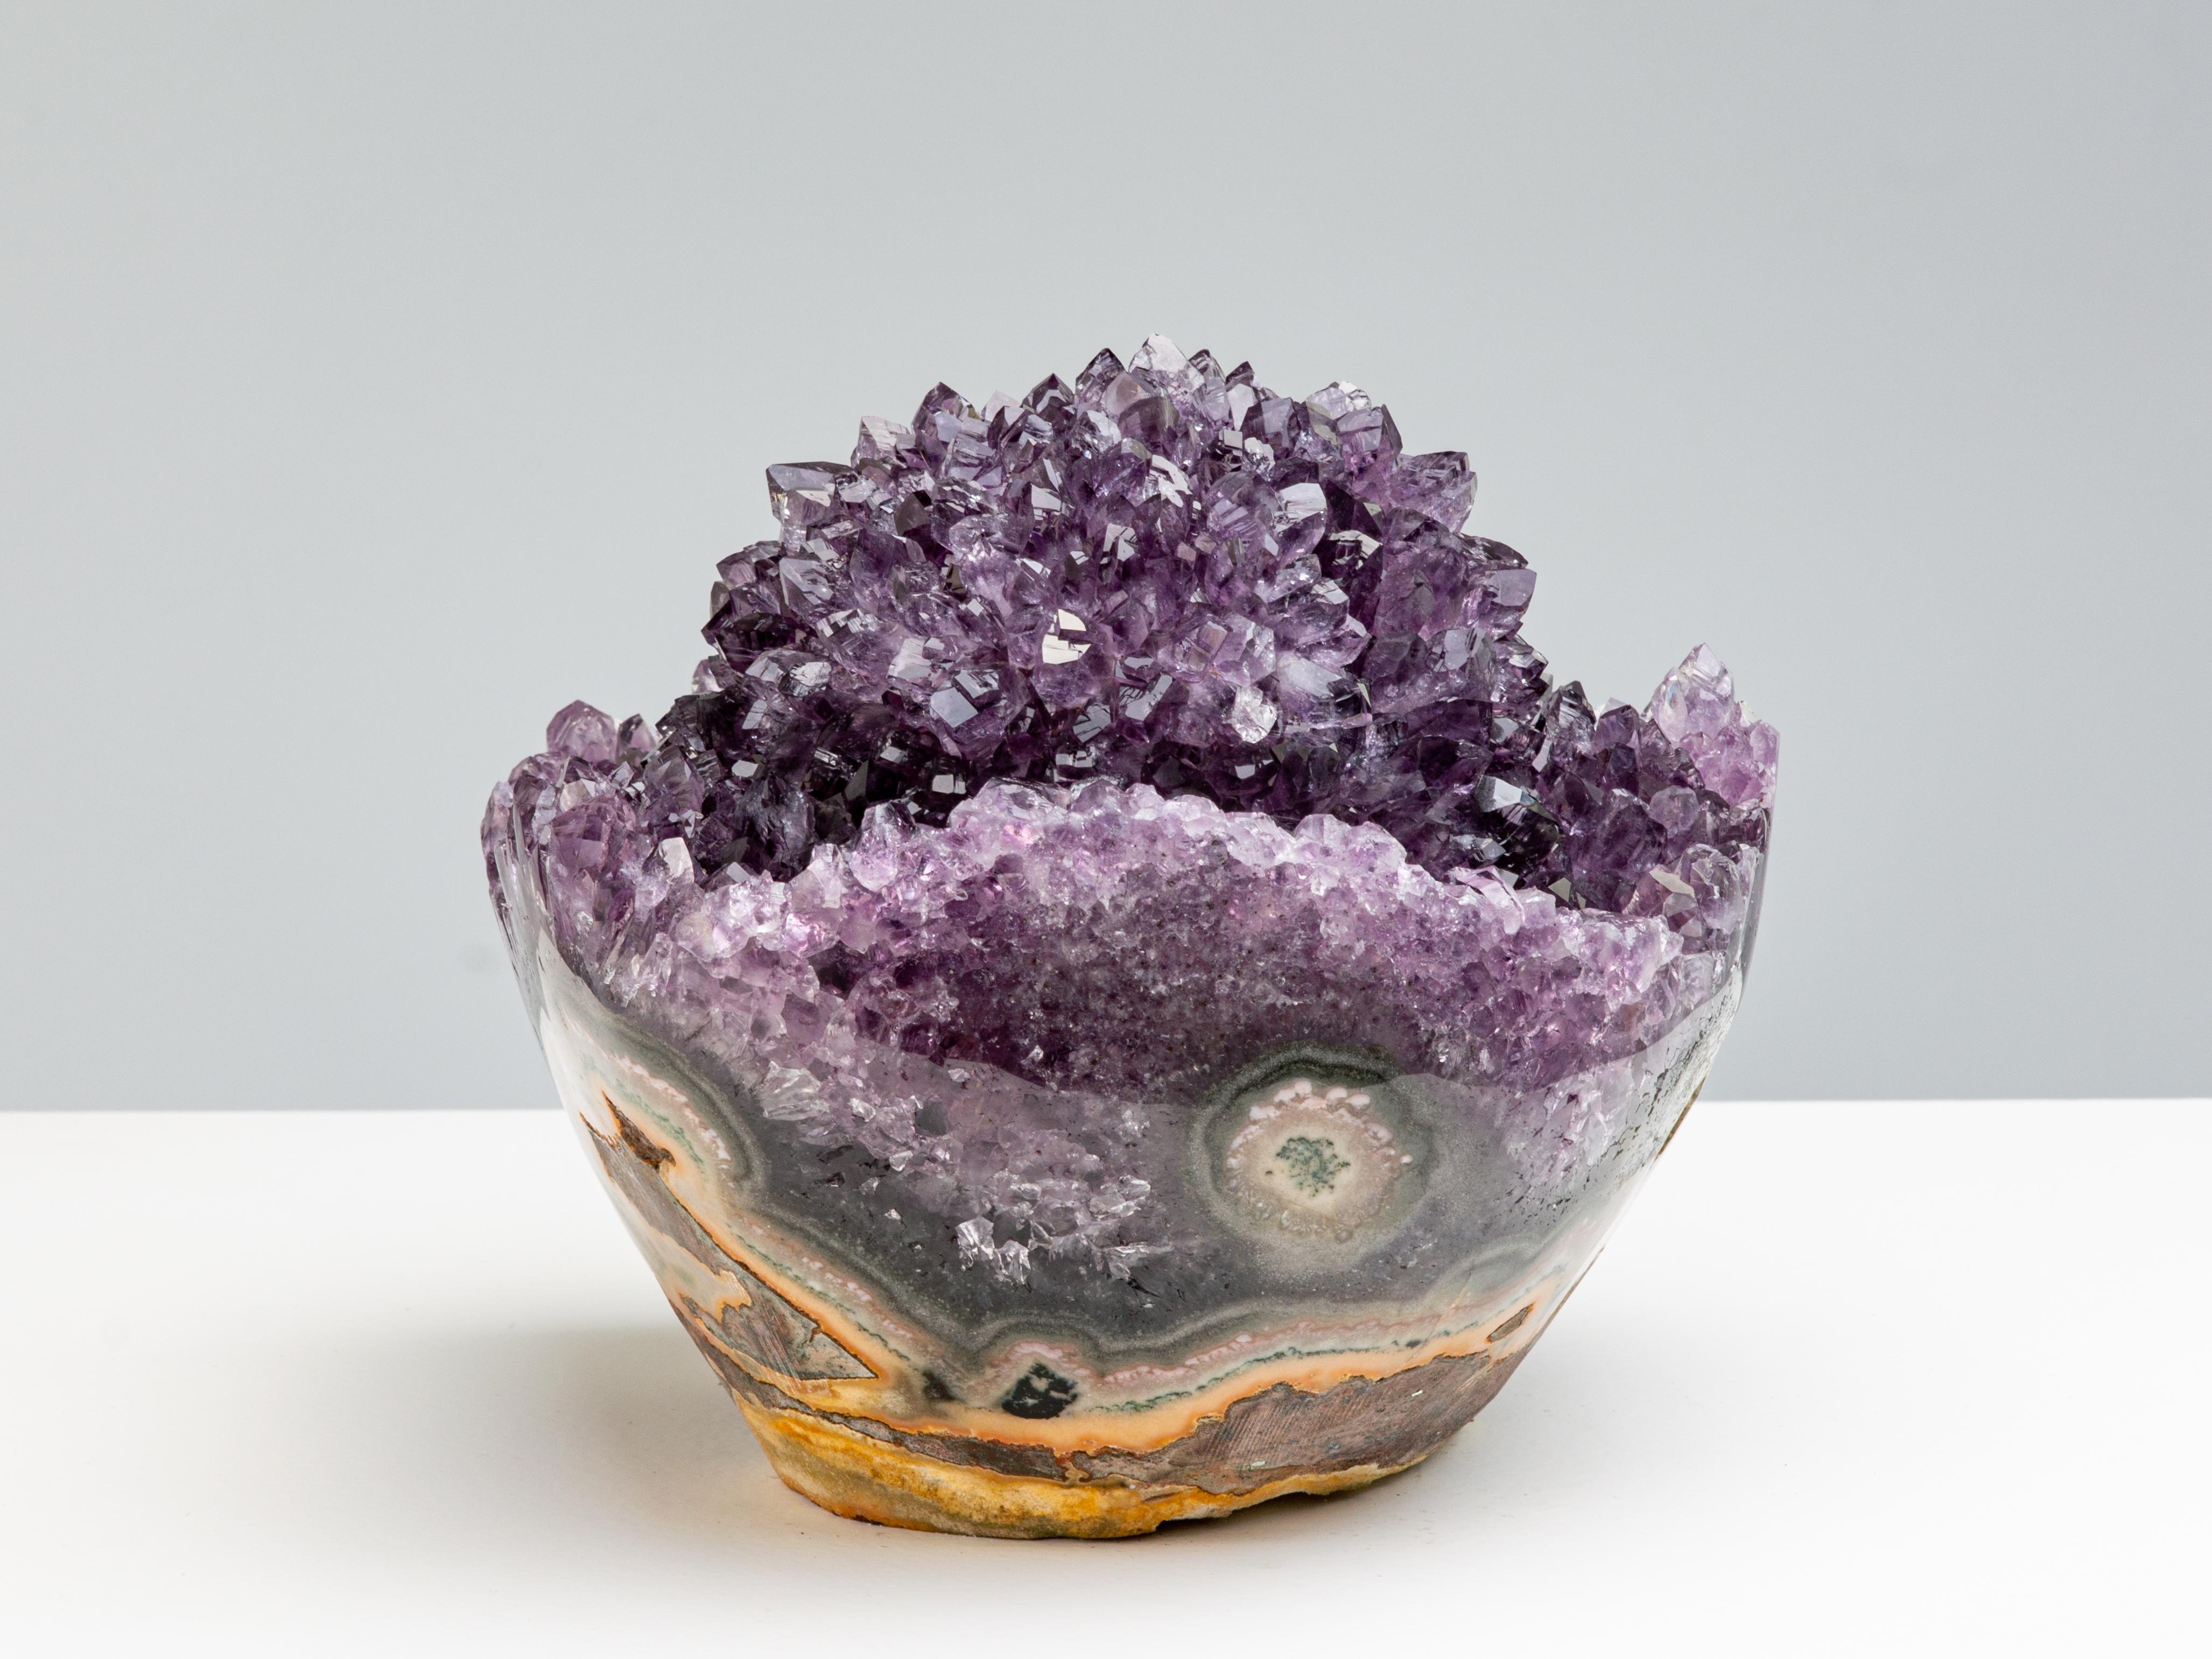 This modest sized formation has a beautful symmetry, with a rounded base and
a central stalactite with radially oriented amethyst crystals resembling a rosette.

This piece was legally and ethically sourced directly in the prestigious mines of